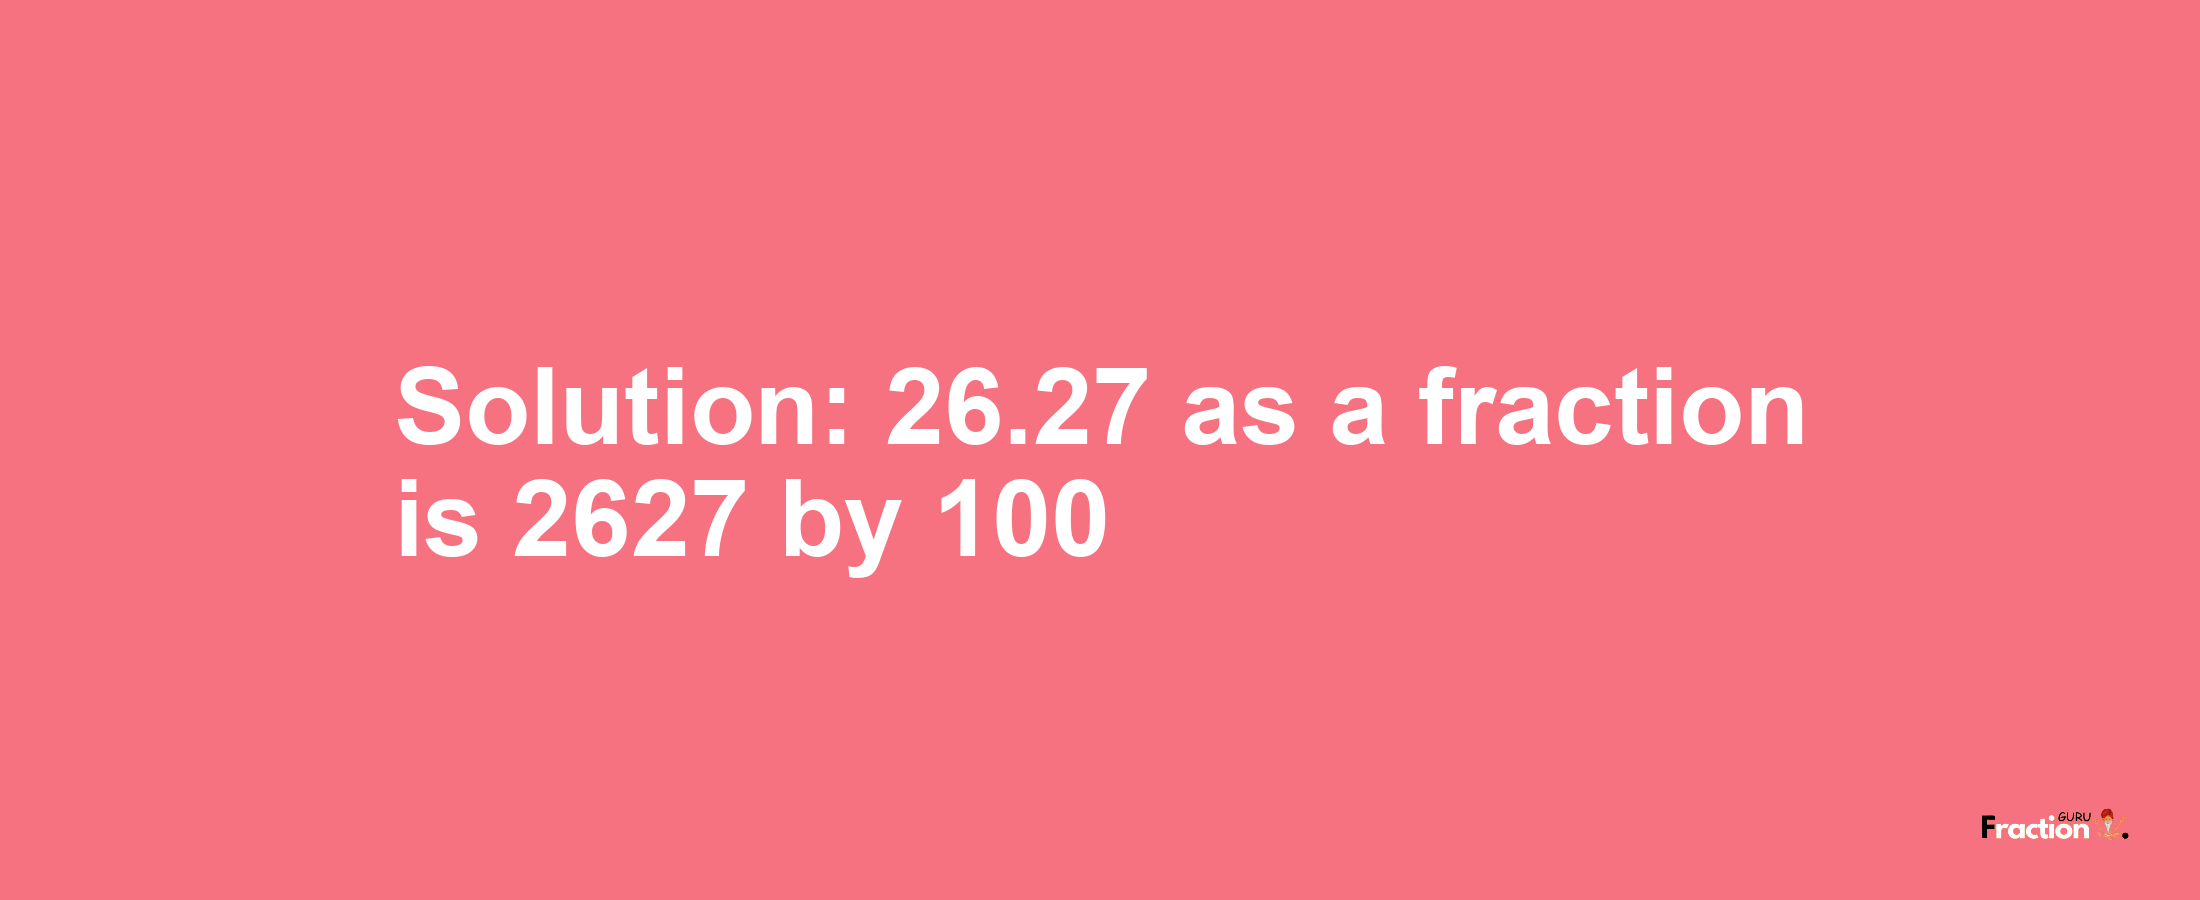 Solution:26.27 as a fraction is 2627/100